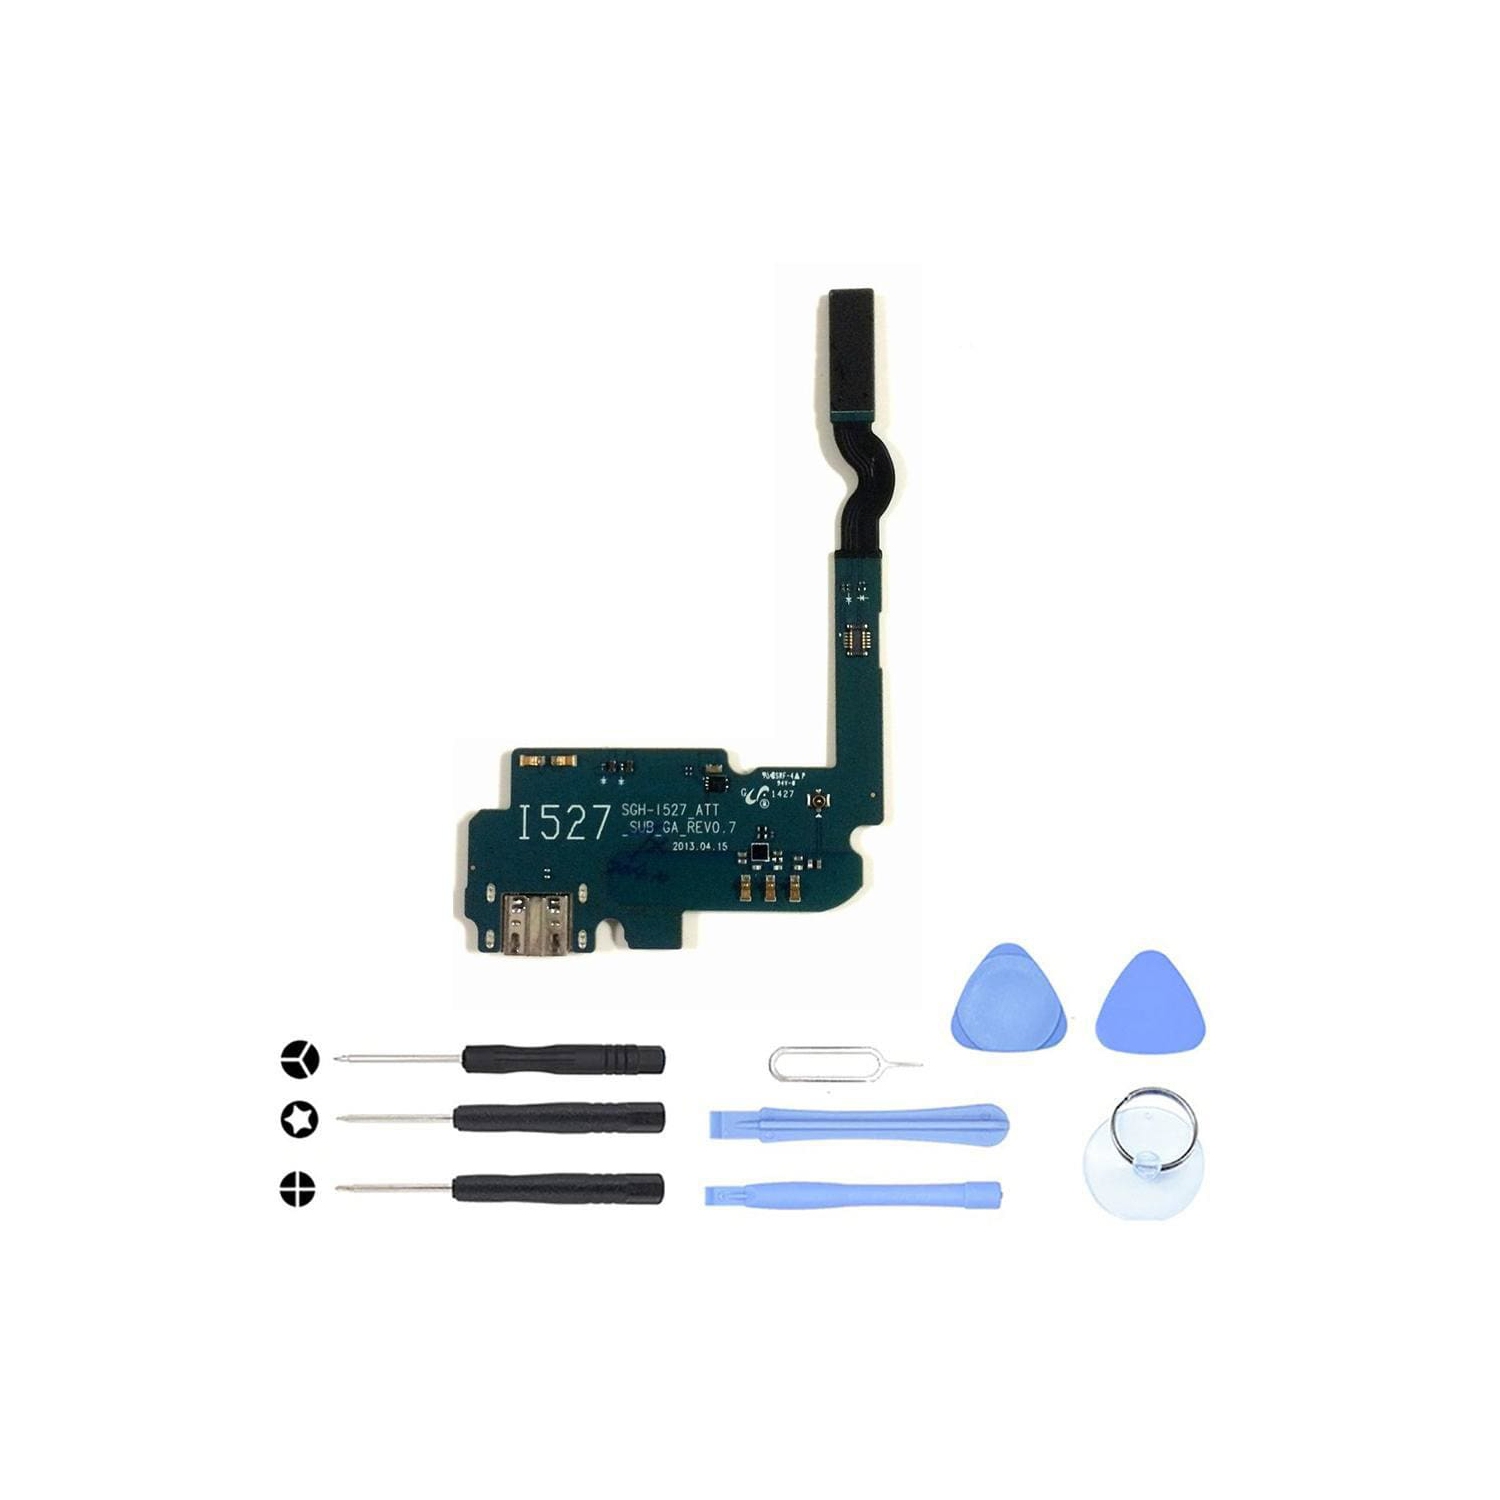 Charging port flex cable and microphone for Samsung Galaxy Mega 6.3 SGH-i527